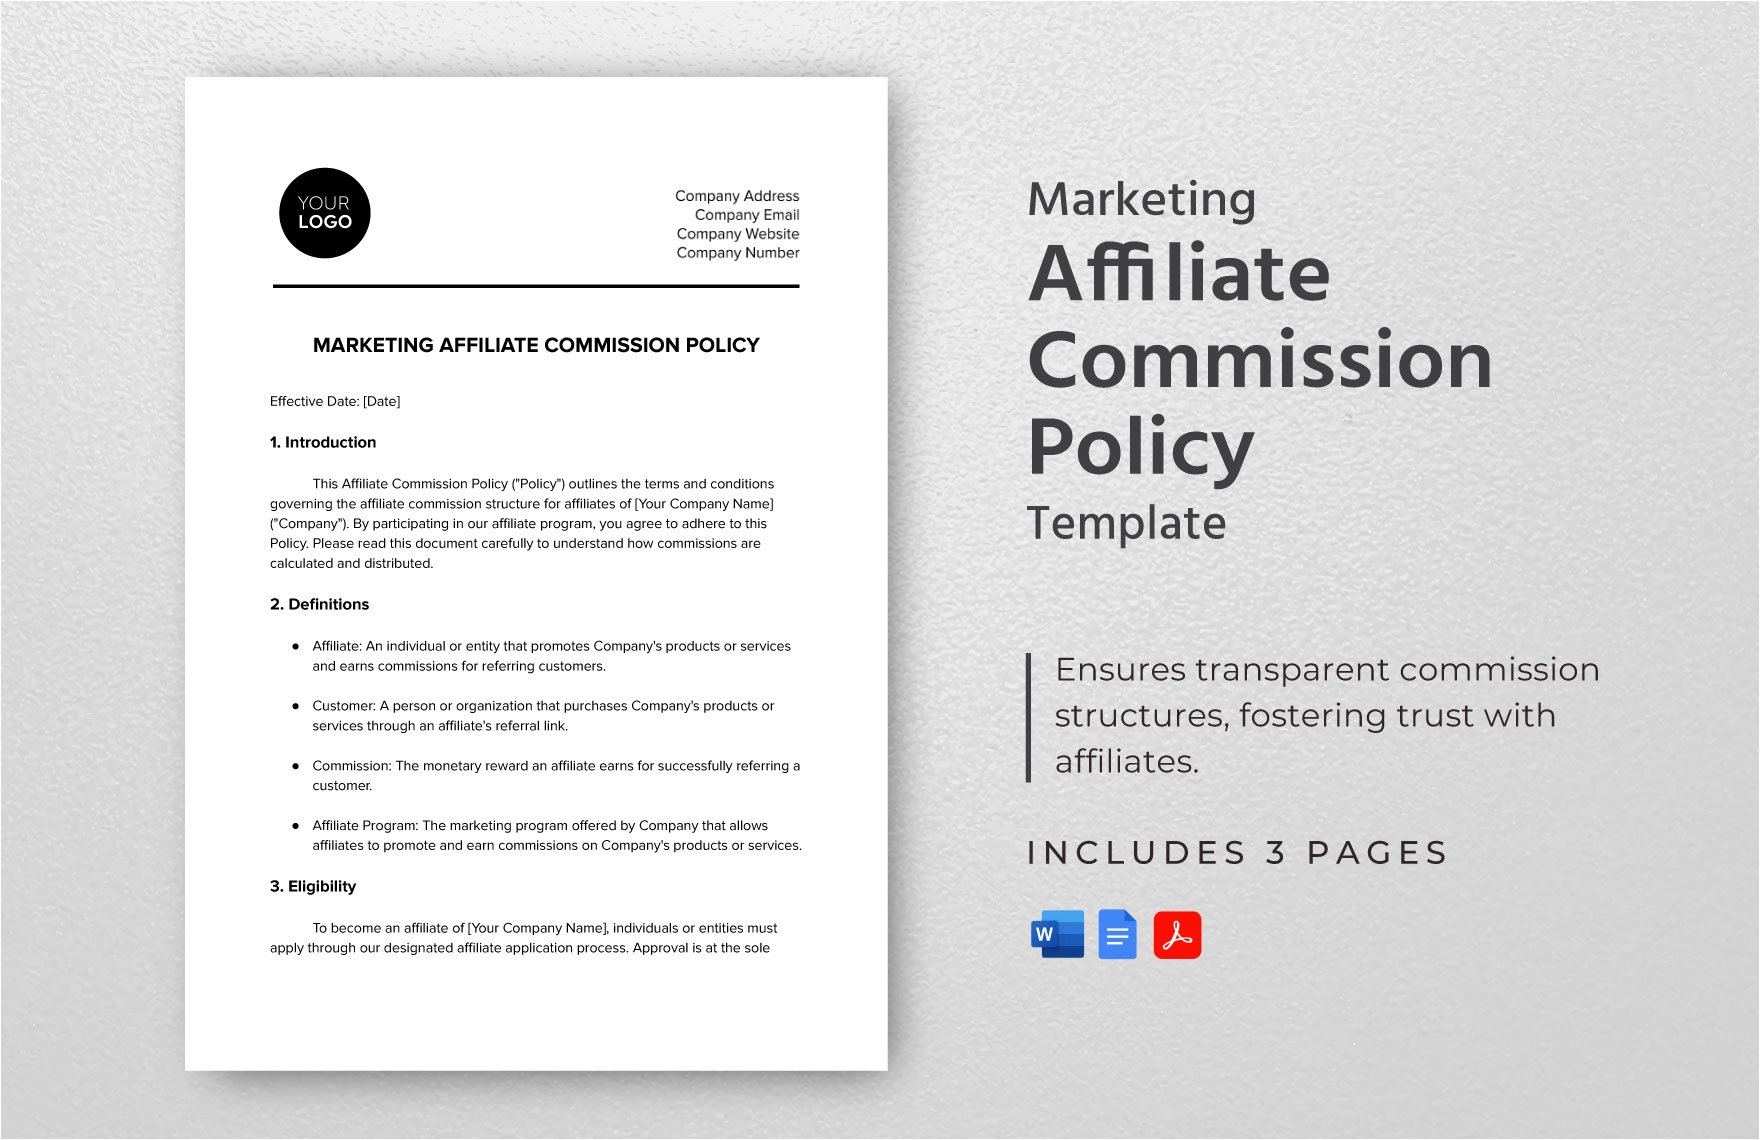 Marketing Affiliate Commission Policy Template in Word, Google Docs, PDF